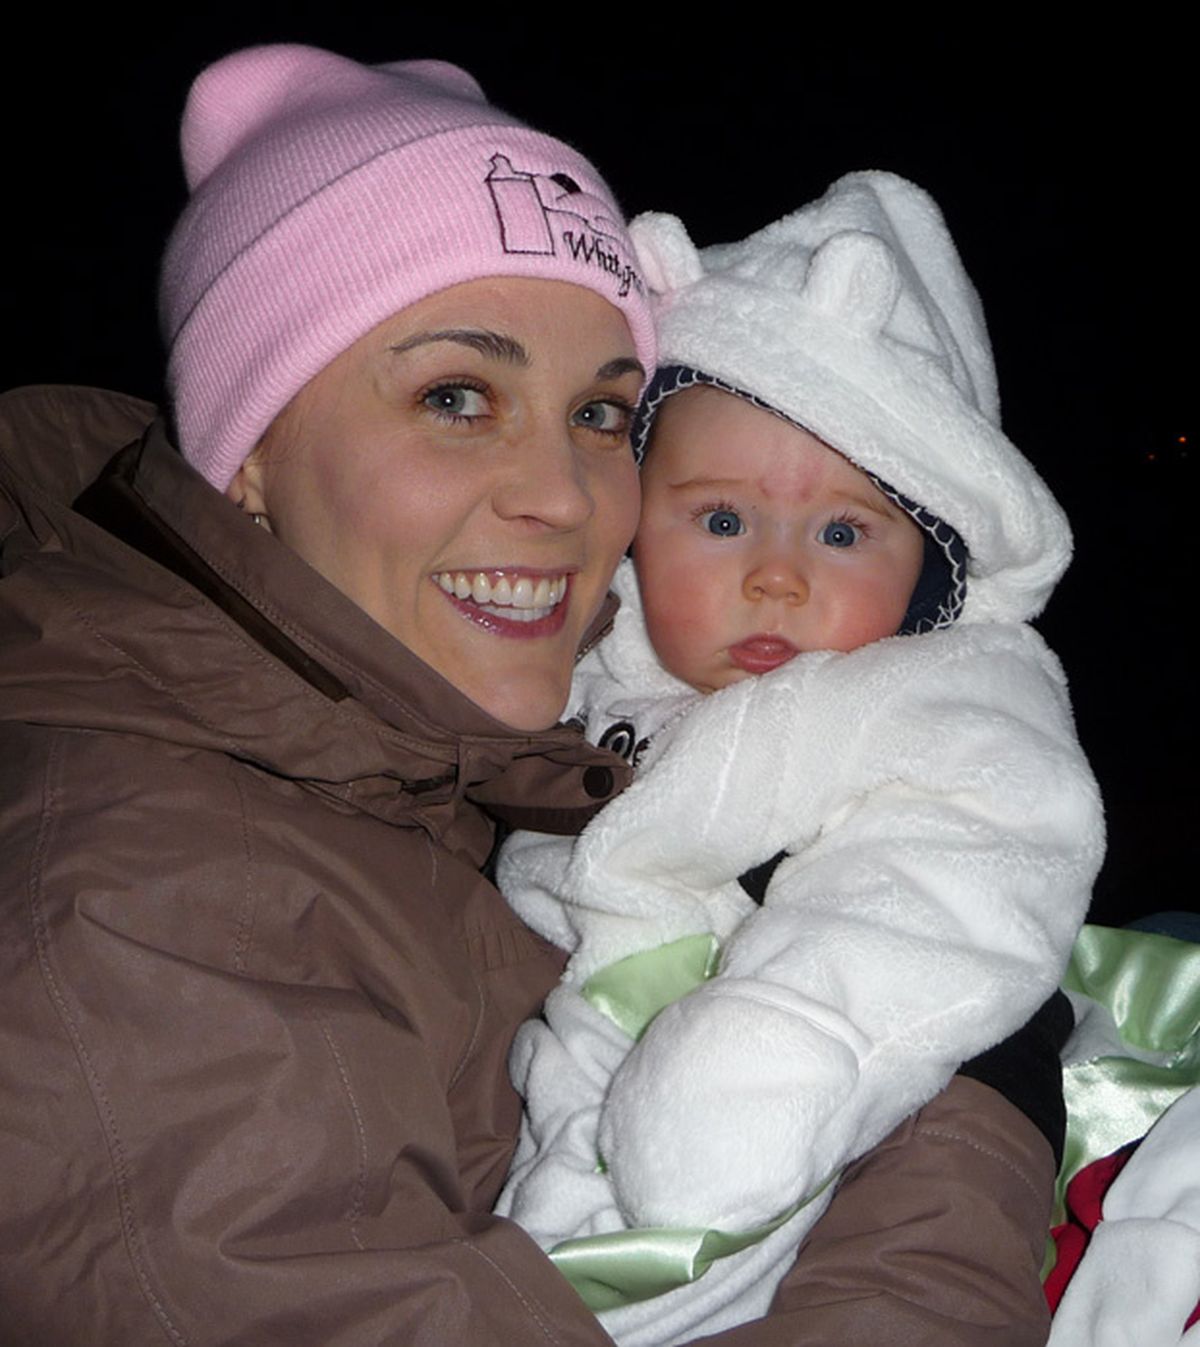 Now: Andee Schmick Thurston and 7-month-old daughter Kyla Jean enjoy a winter moment in Dayton.